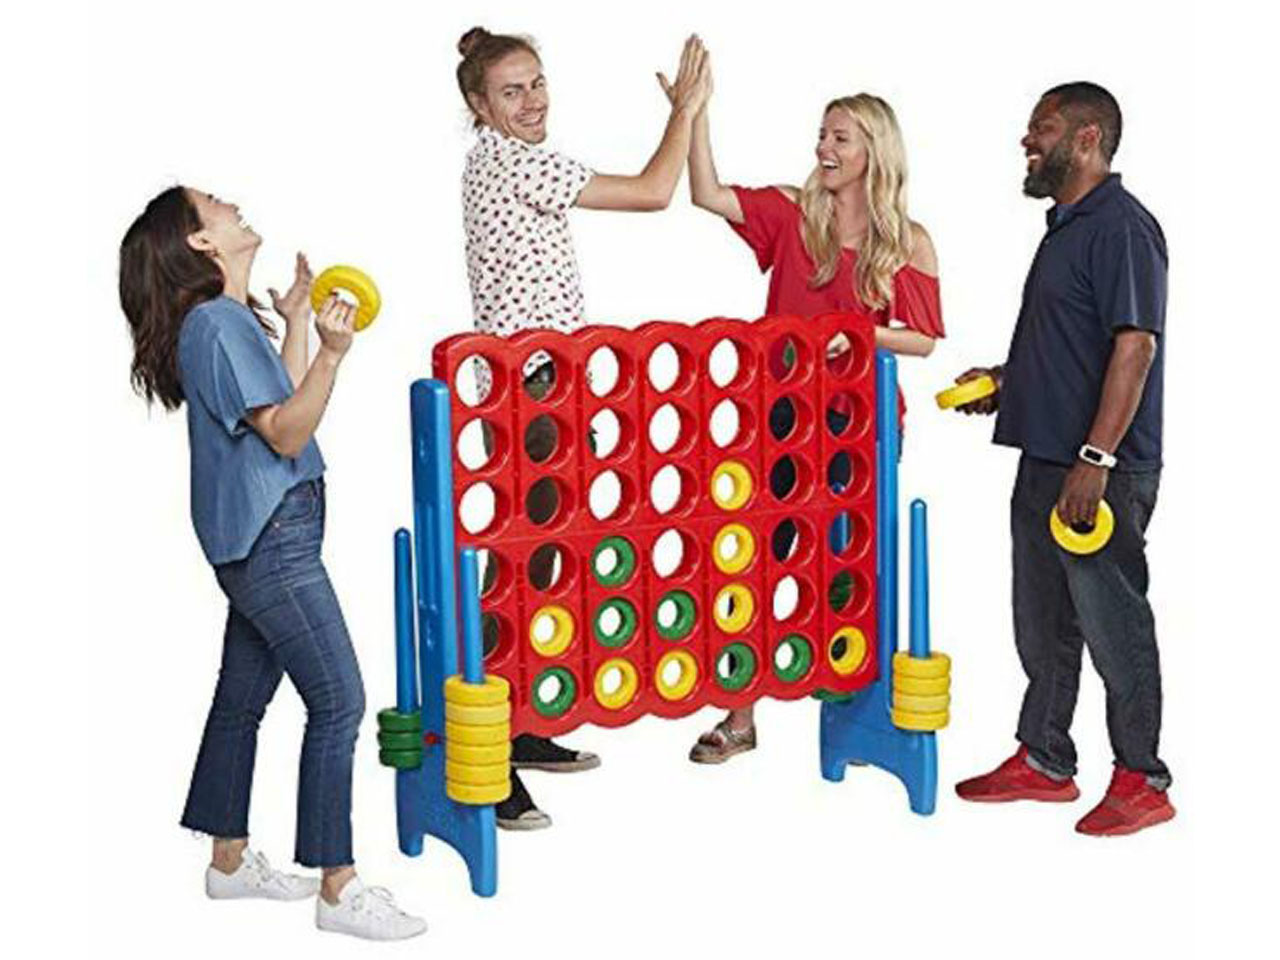 connect4 image 3